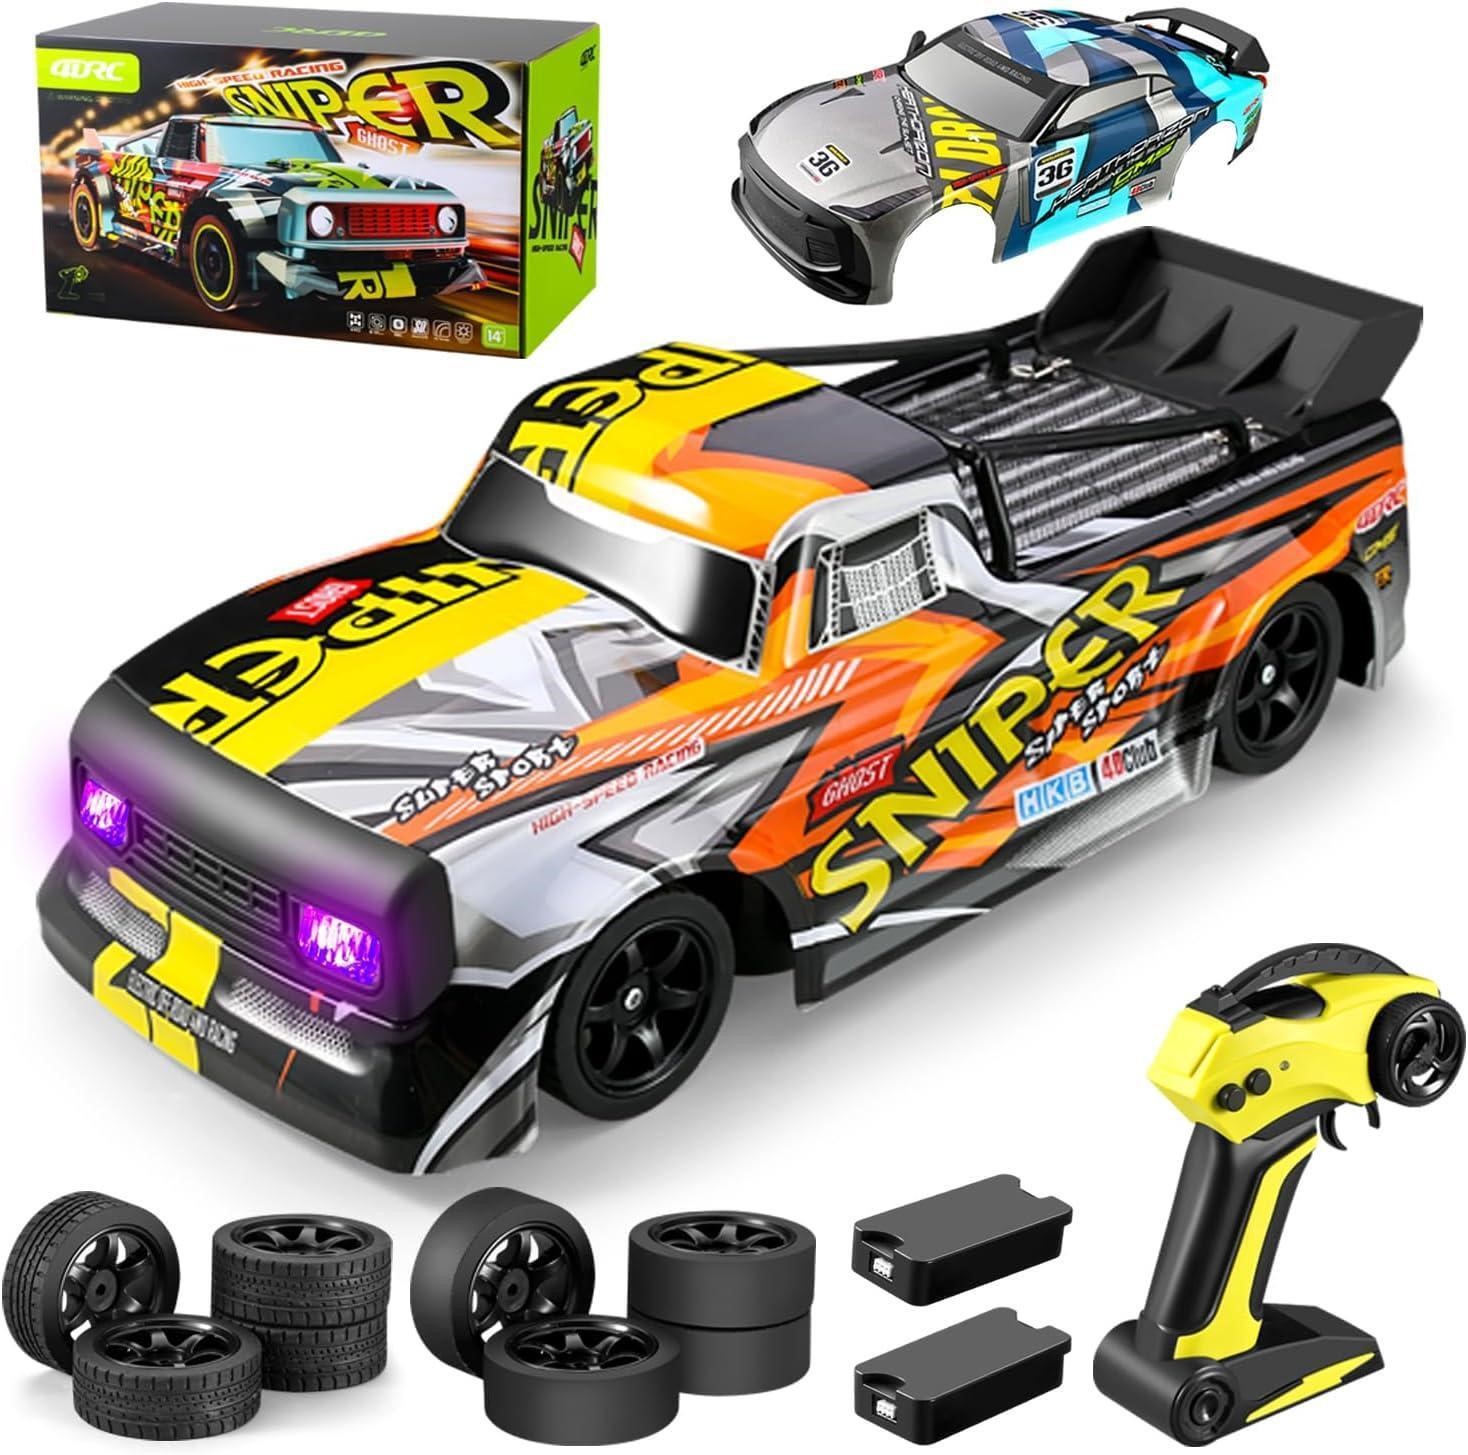 ULN - 4DRC H4 2.4Ghz RC 4WD Monster Truck